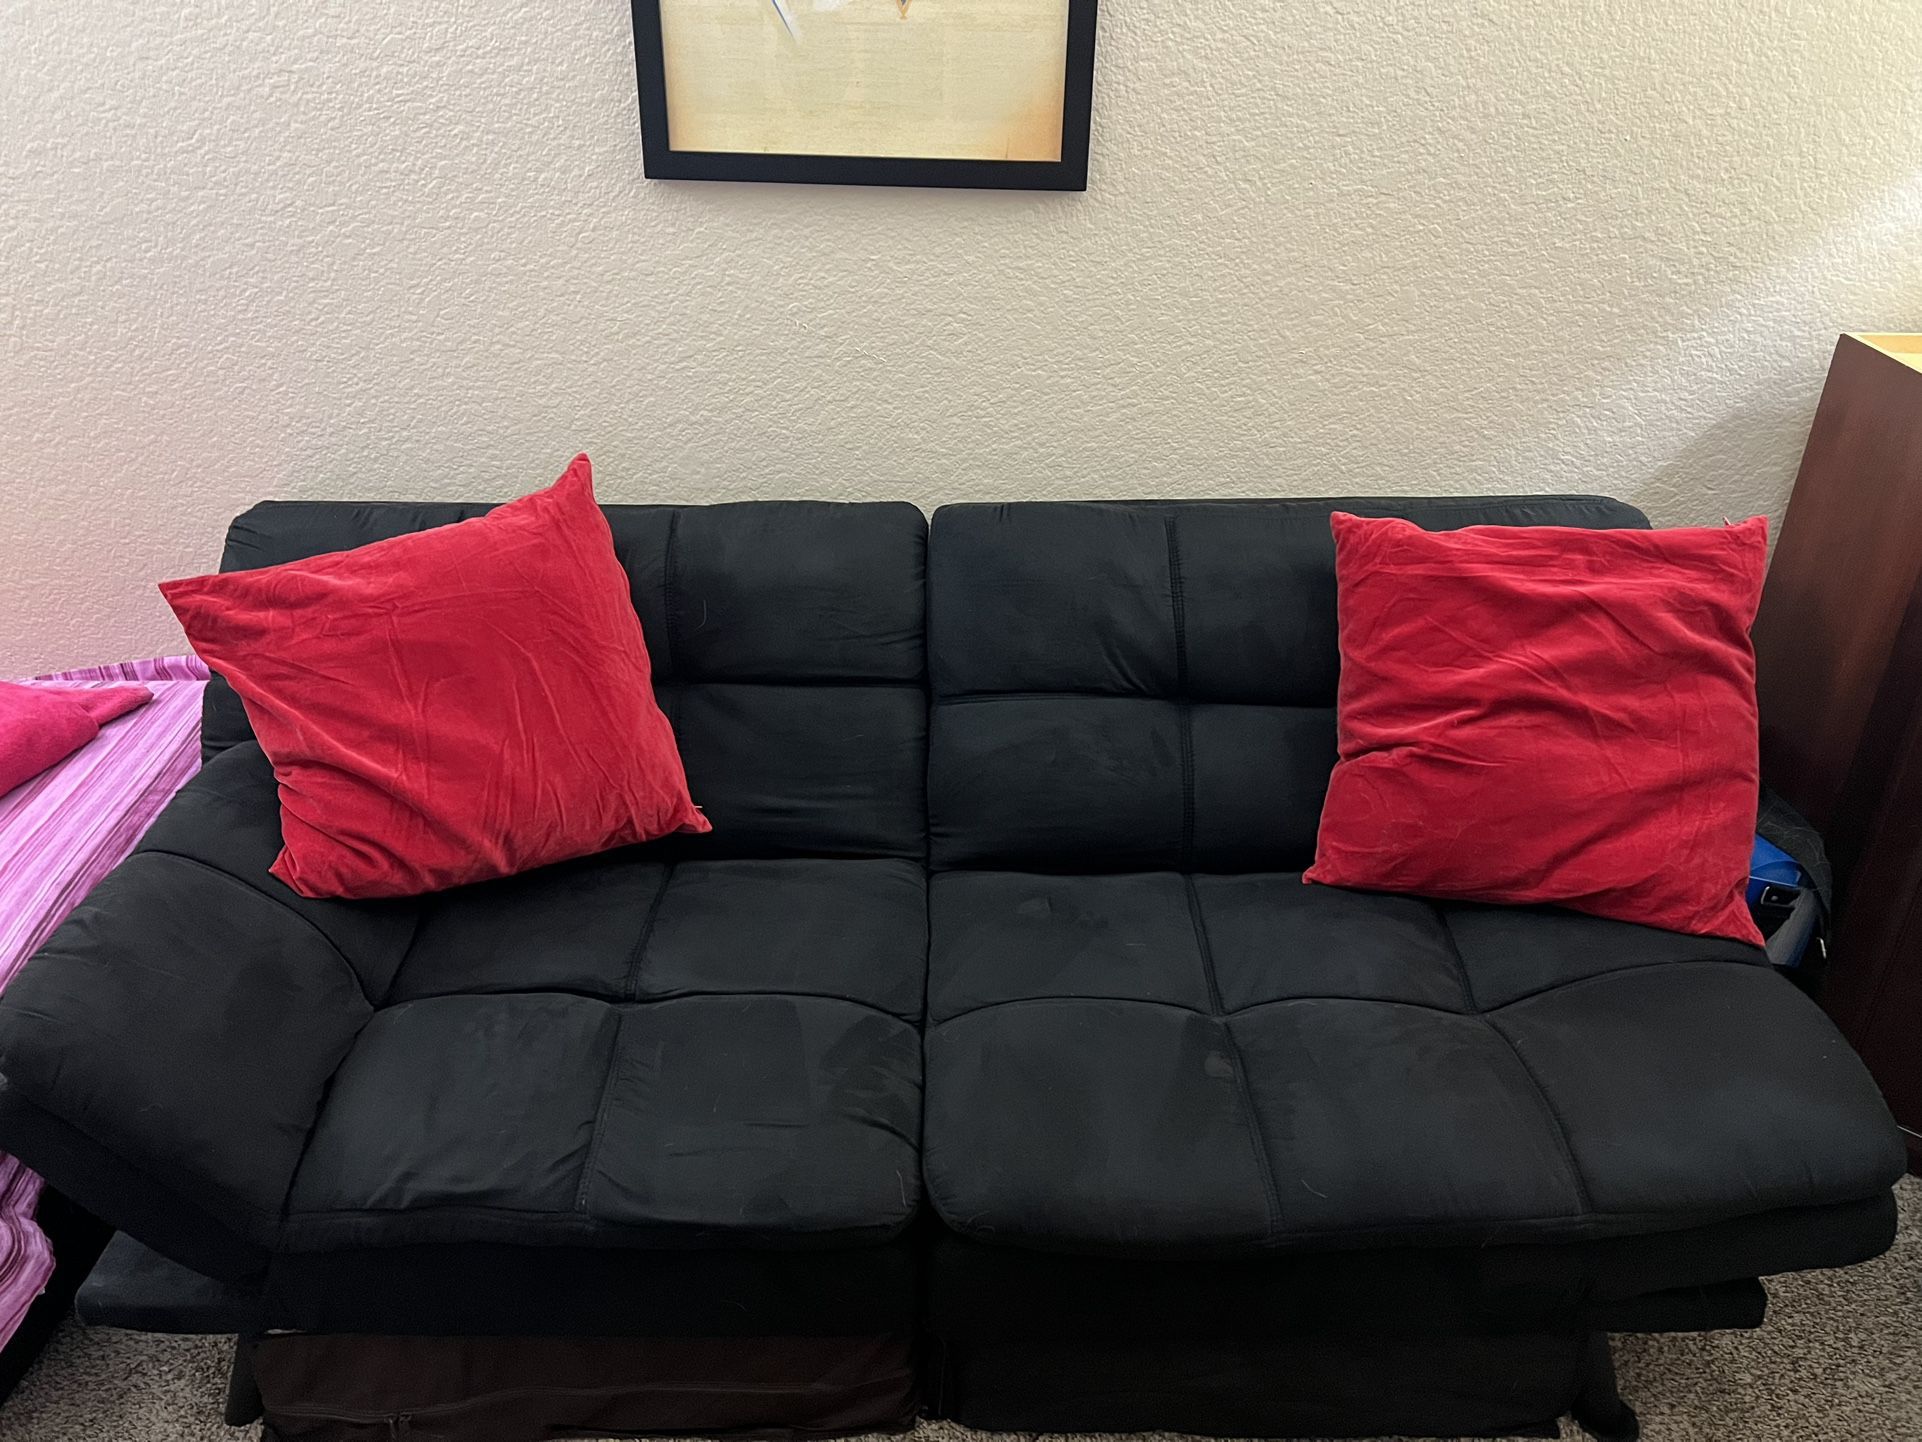 Mainstays Memory Foam Futon, Black Faux Suede Fabric For Sale In San  Clemente, Ca – Offerup Throughout Black Faux Suede Memory Foam Sofas (View 14 of 15)